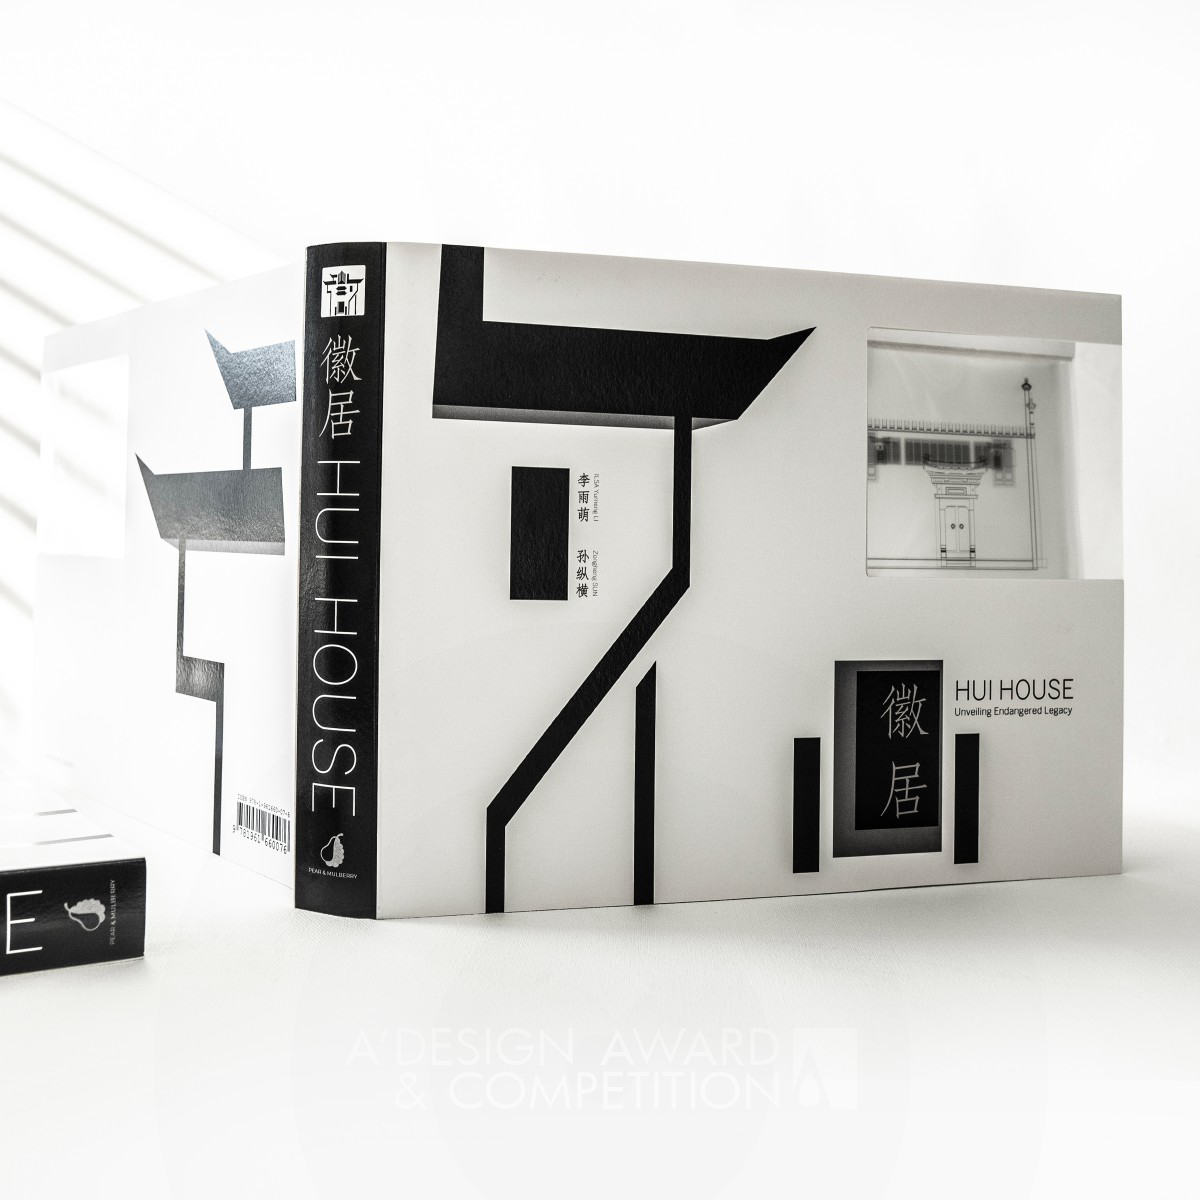 Hui House Architectural Exhibition Book by Yumeng Li